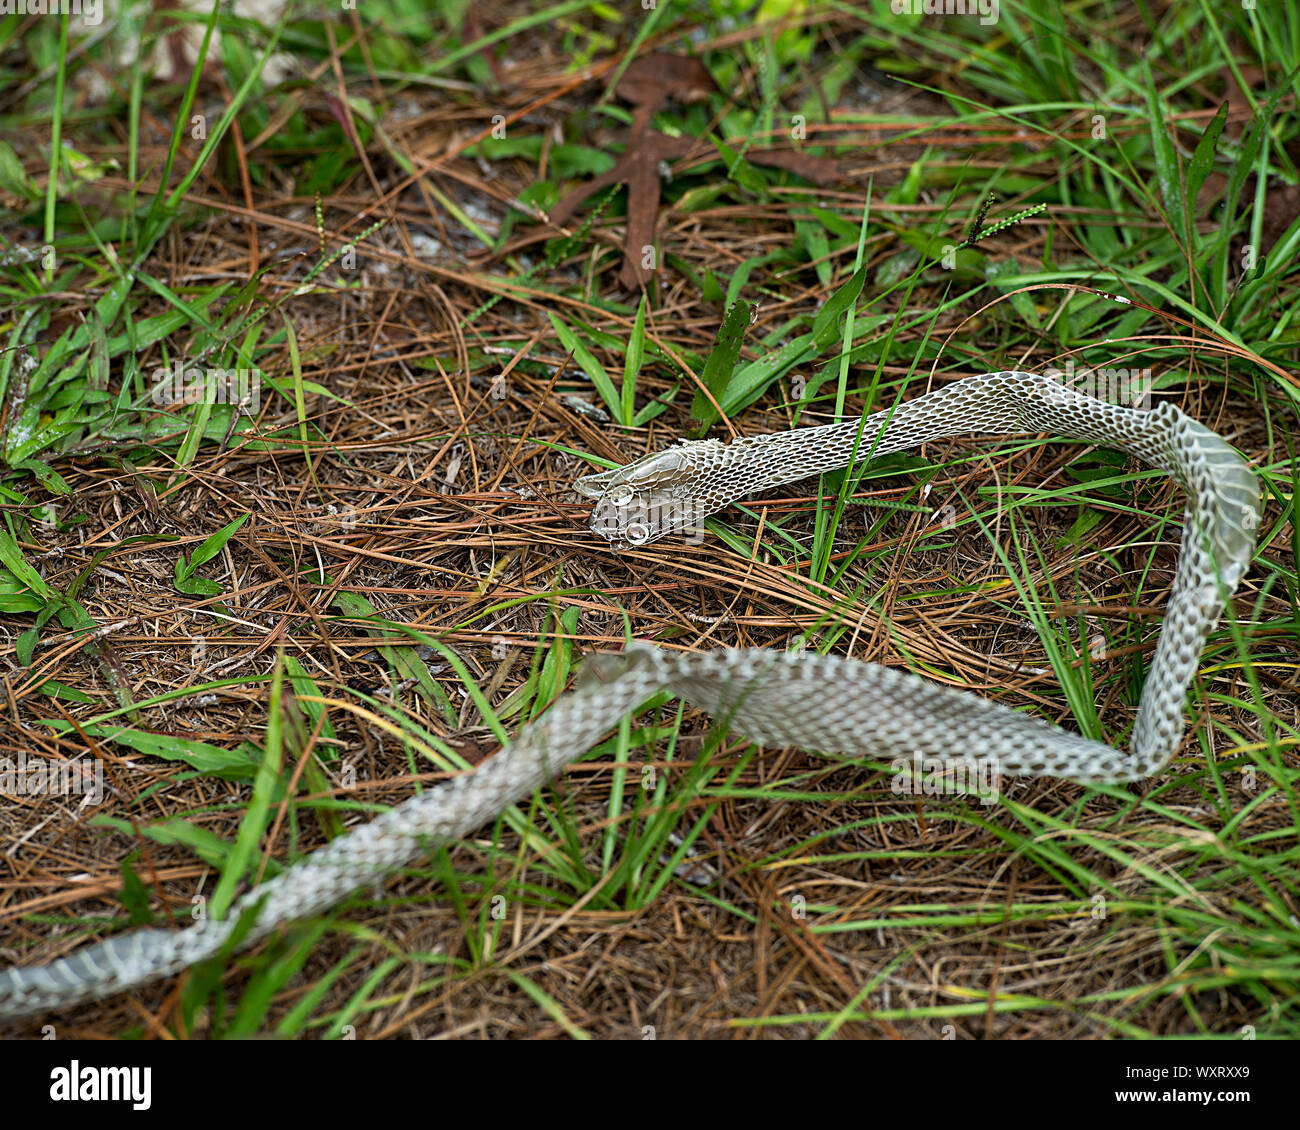 Snake Shedding Skin on the ground with green grass in its surrounding. Stock Photo